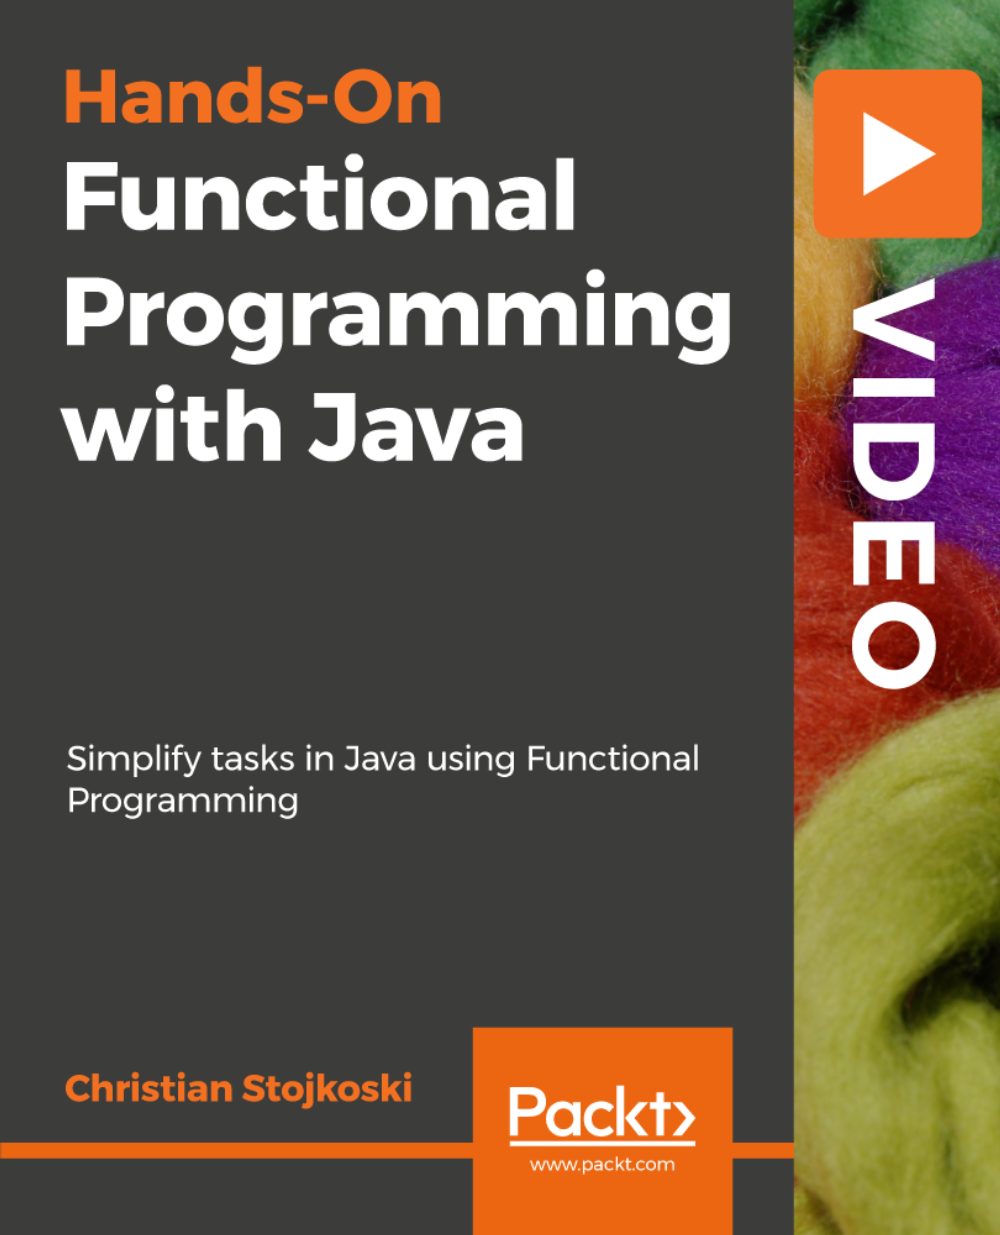 Hands-On Functional Programming with Java